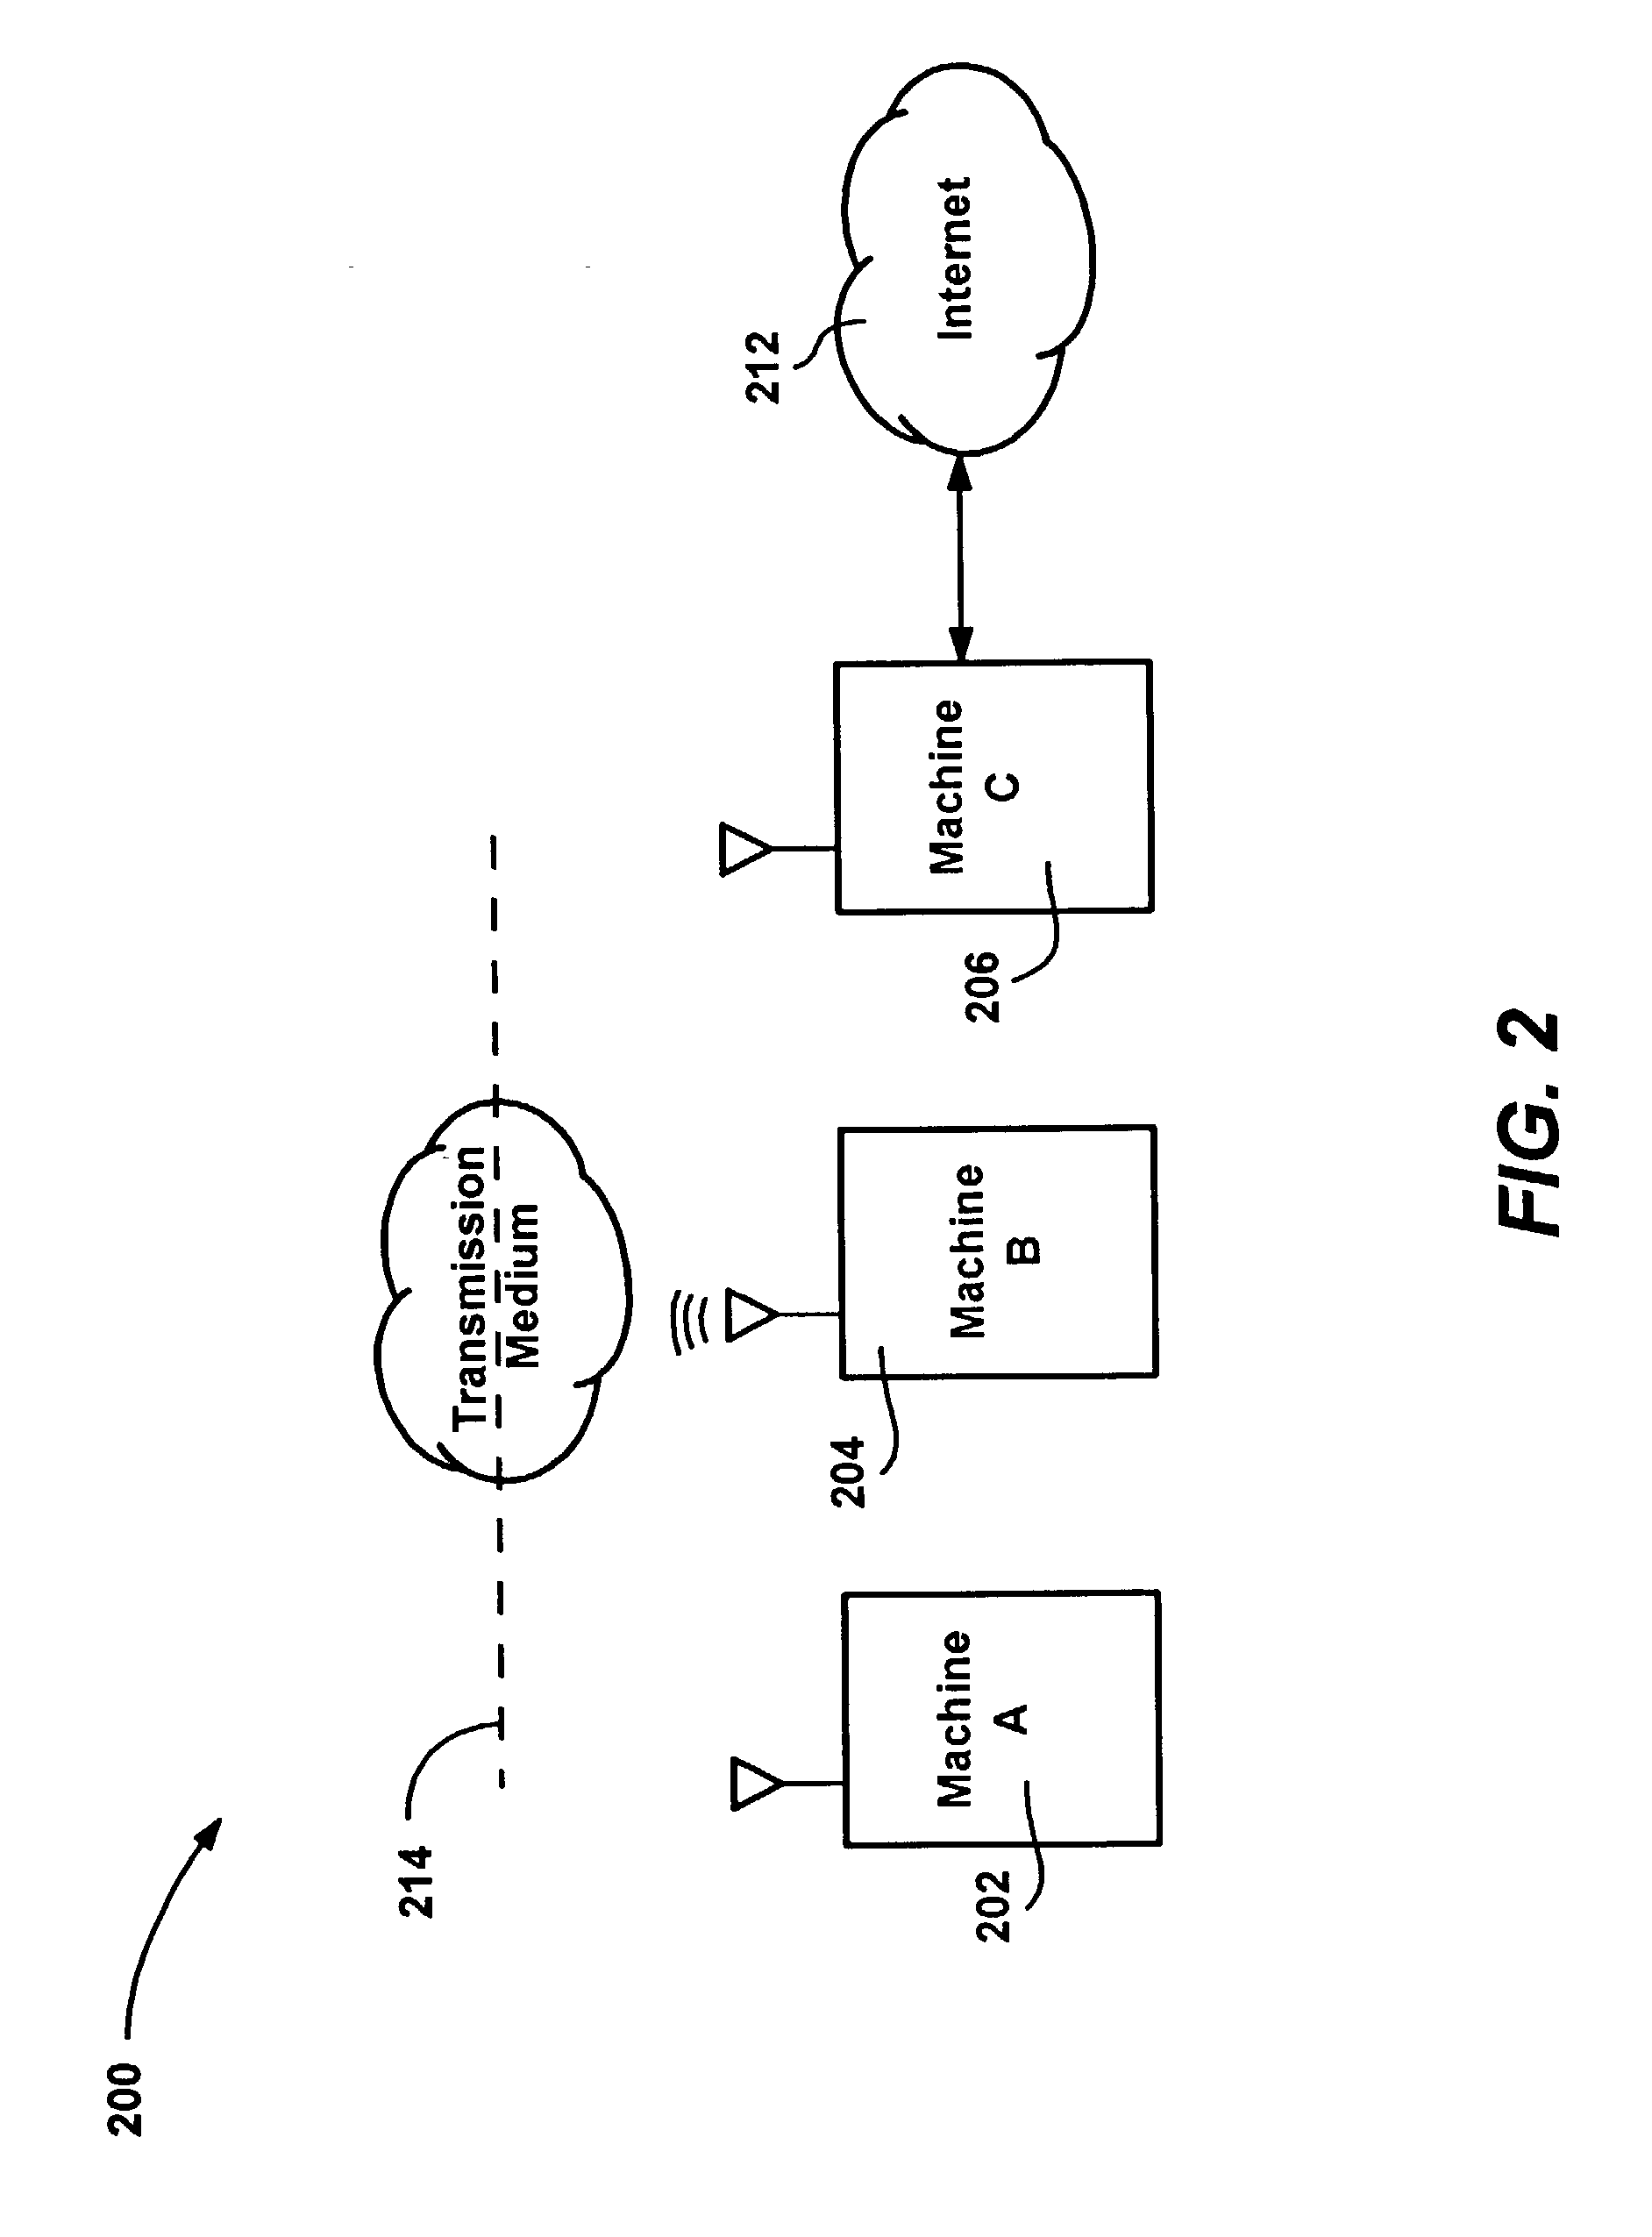 Method and system for measuring load and capacity on a variable capacity channel